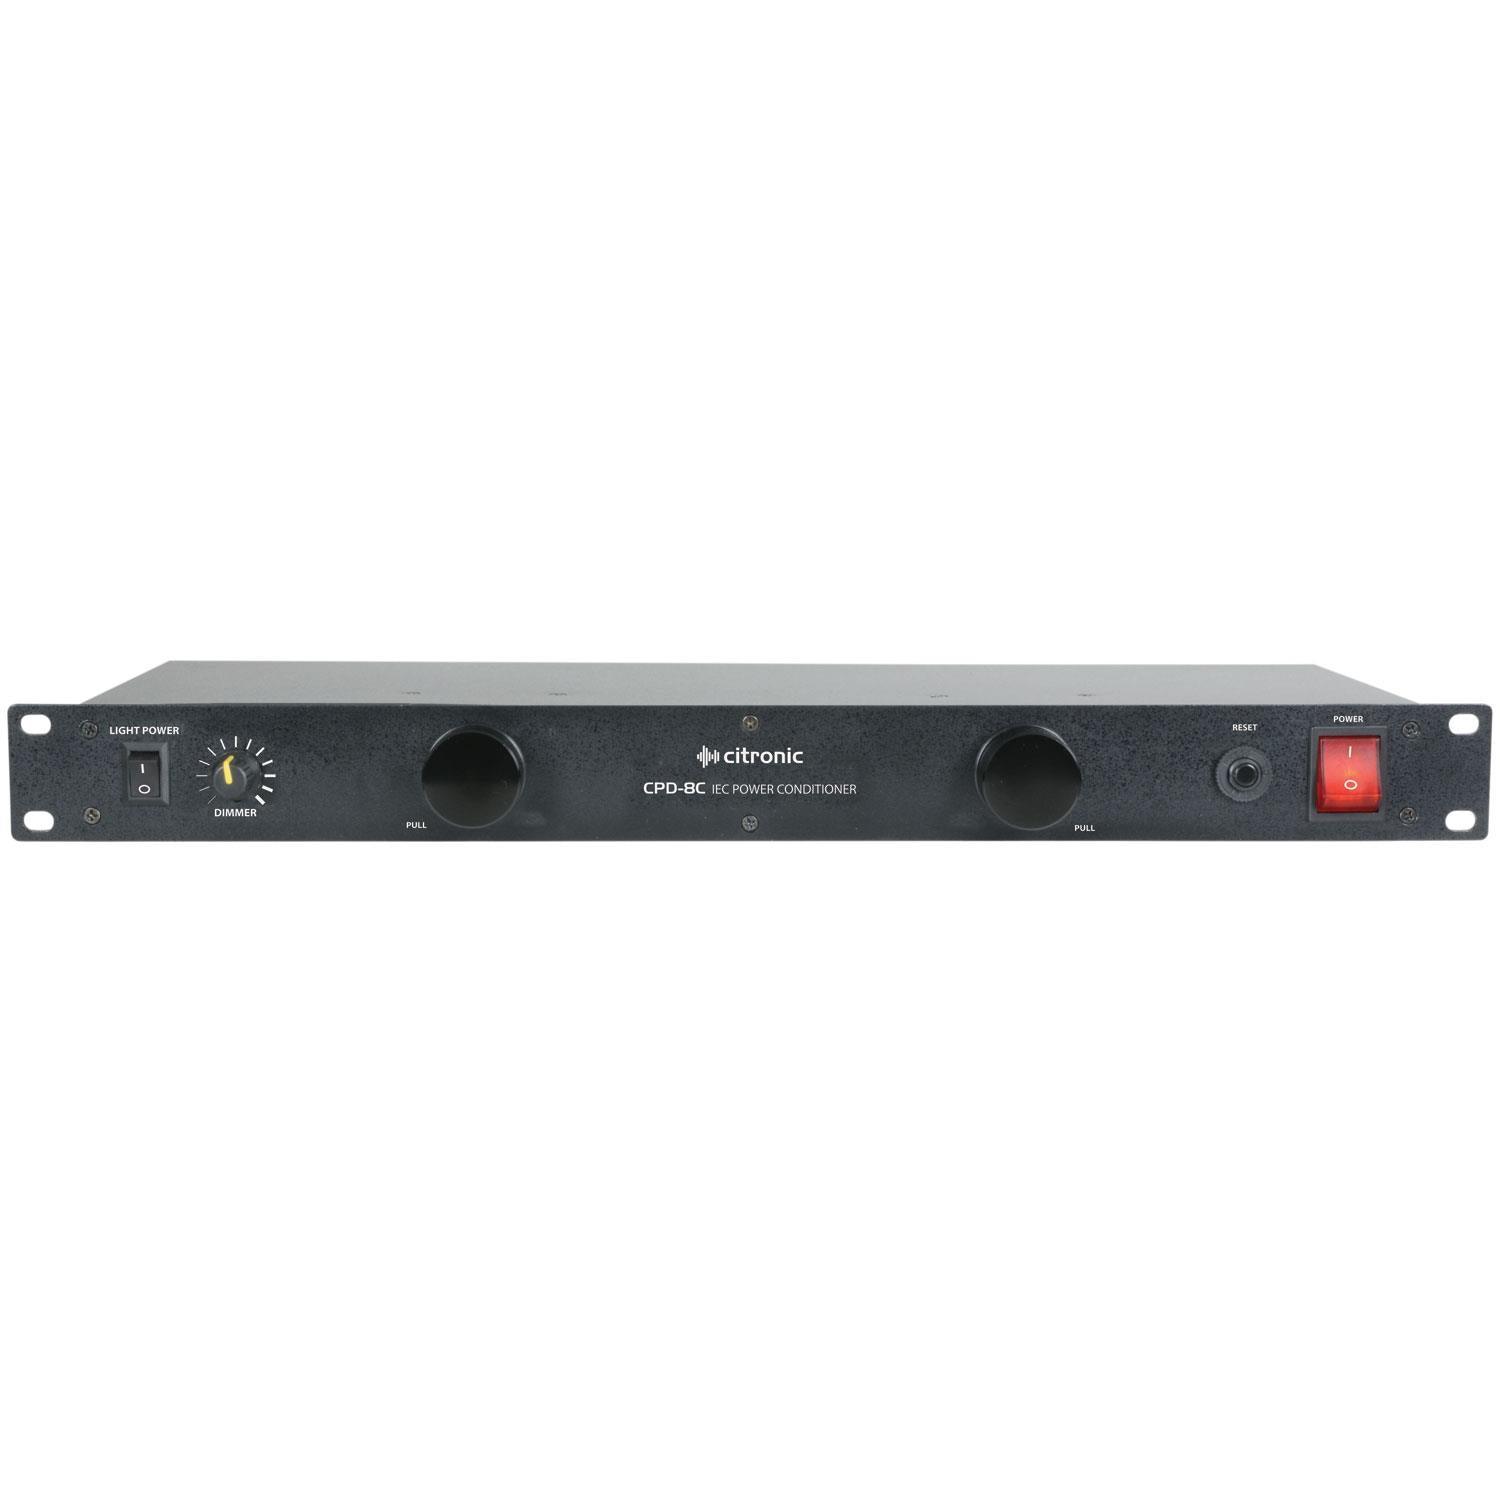 Citronic CPD-8C 8 Way IEC Power Conditioner - DY Pro Audio